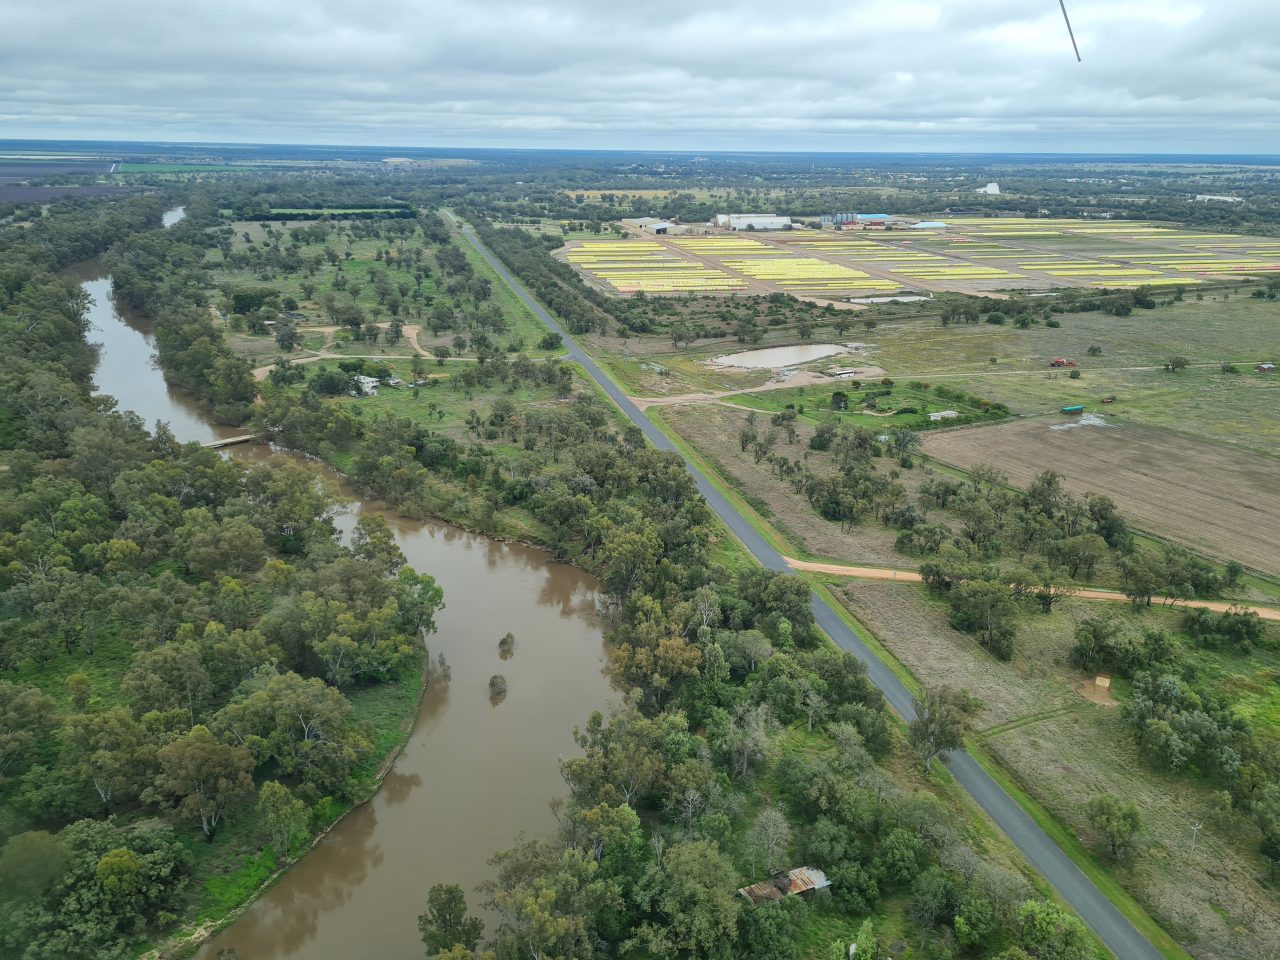 Aerial photo of a river with brown water winding along beside a straight tarred road. Trees line the banks of the river.  In the distance is a large field covered in cotton bales wrapped in yellow neatly lined up.